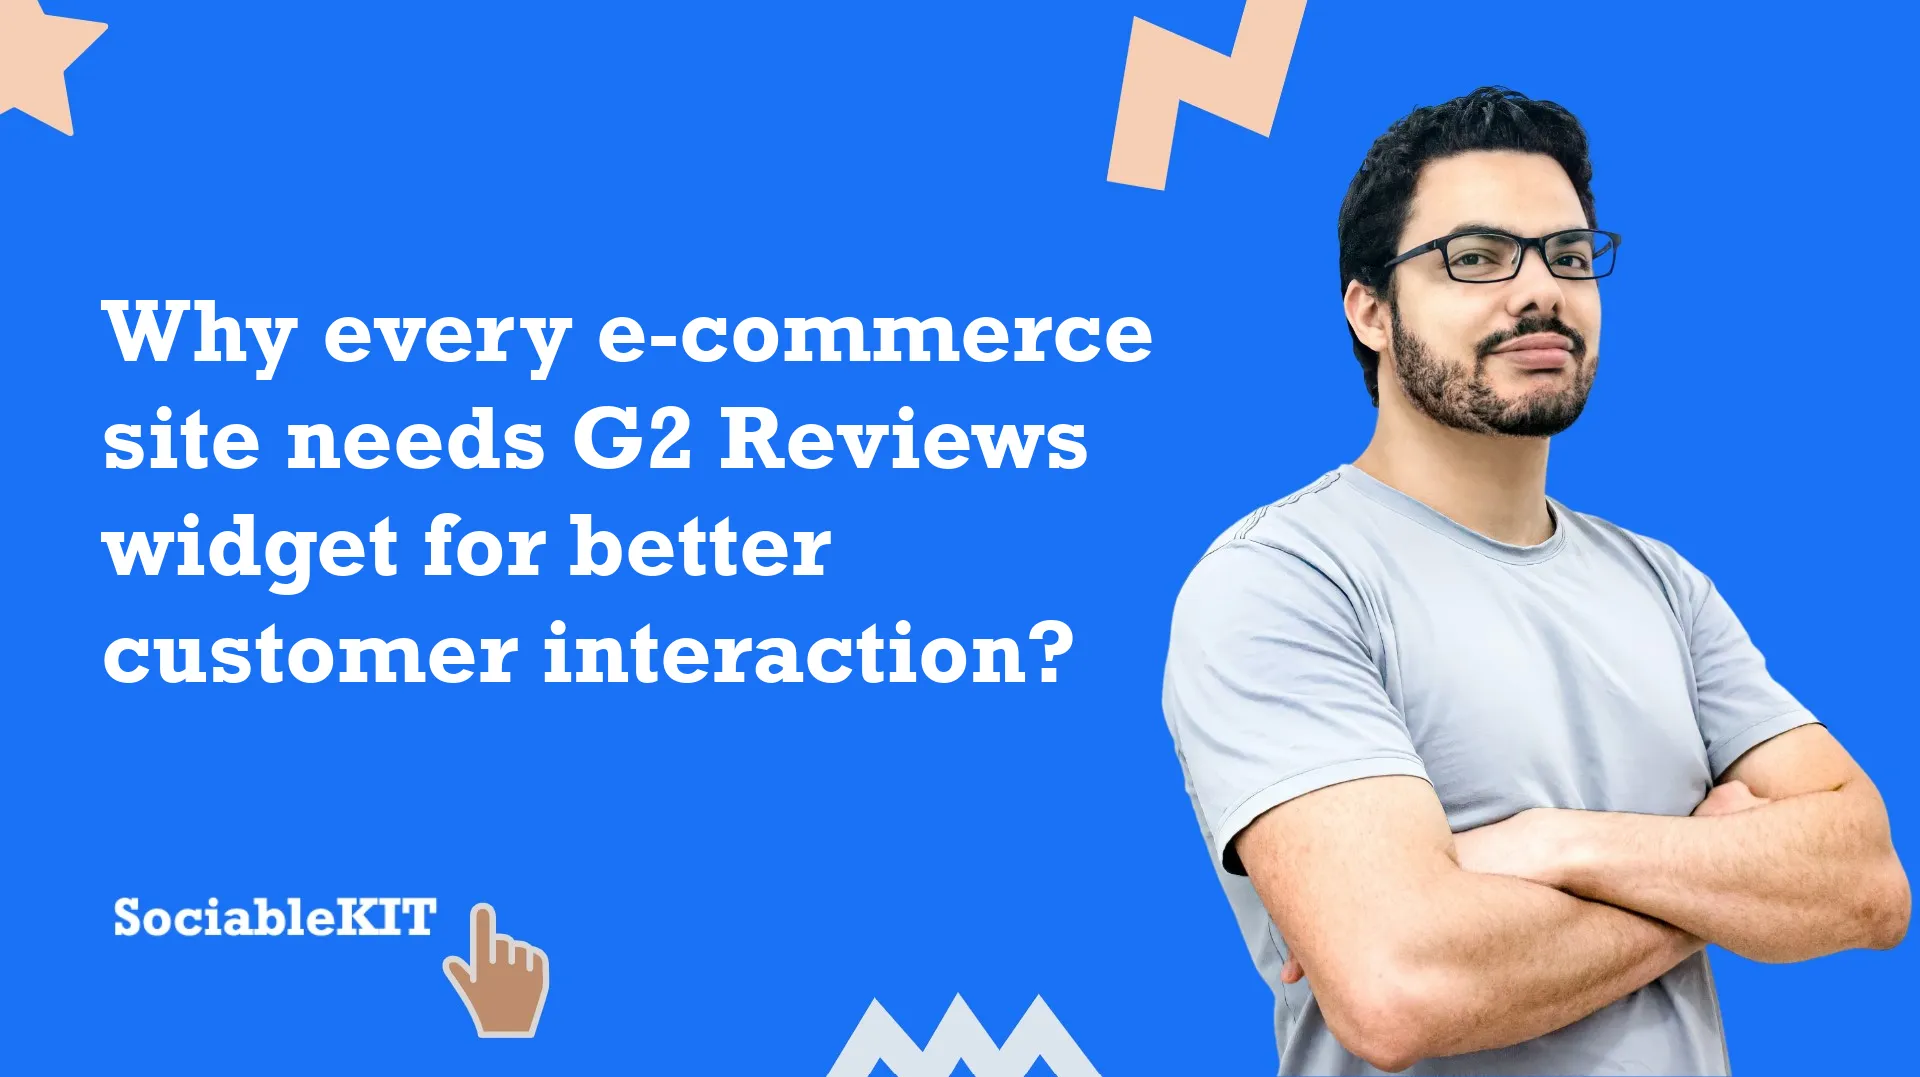 Why every e-commerce site needs G2 Reviews widget for better customer interaction?